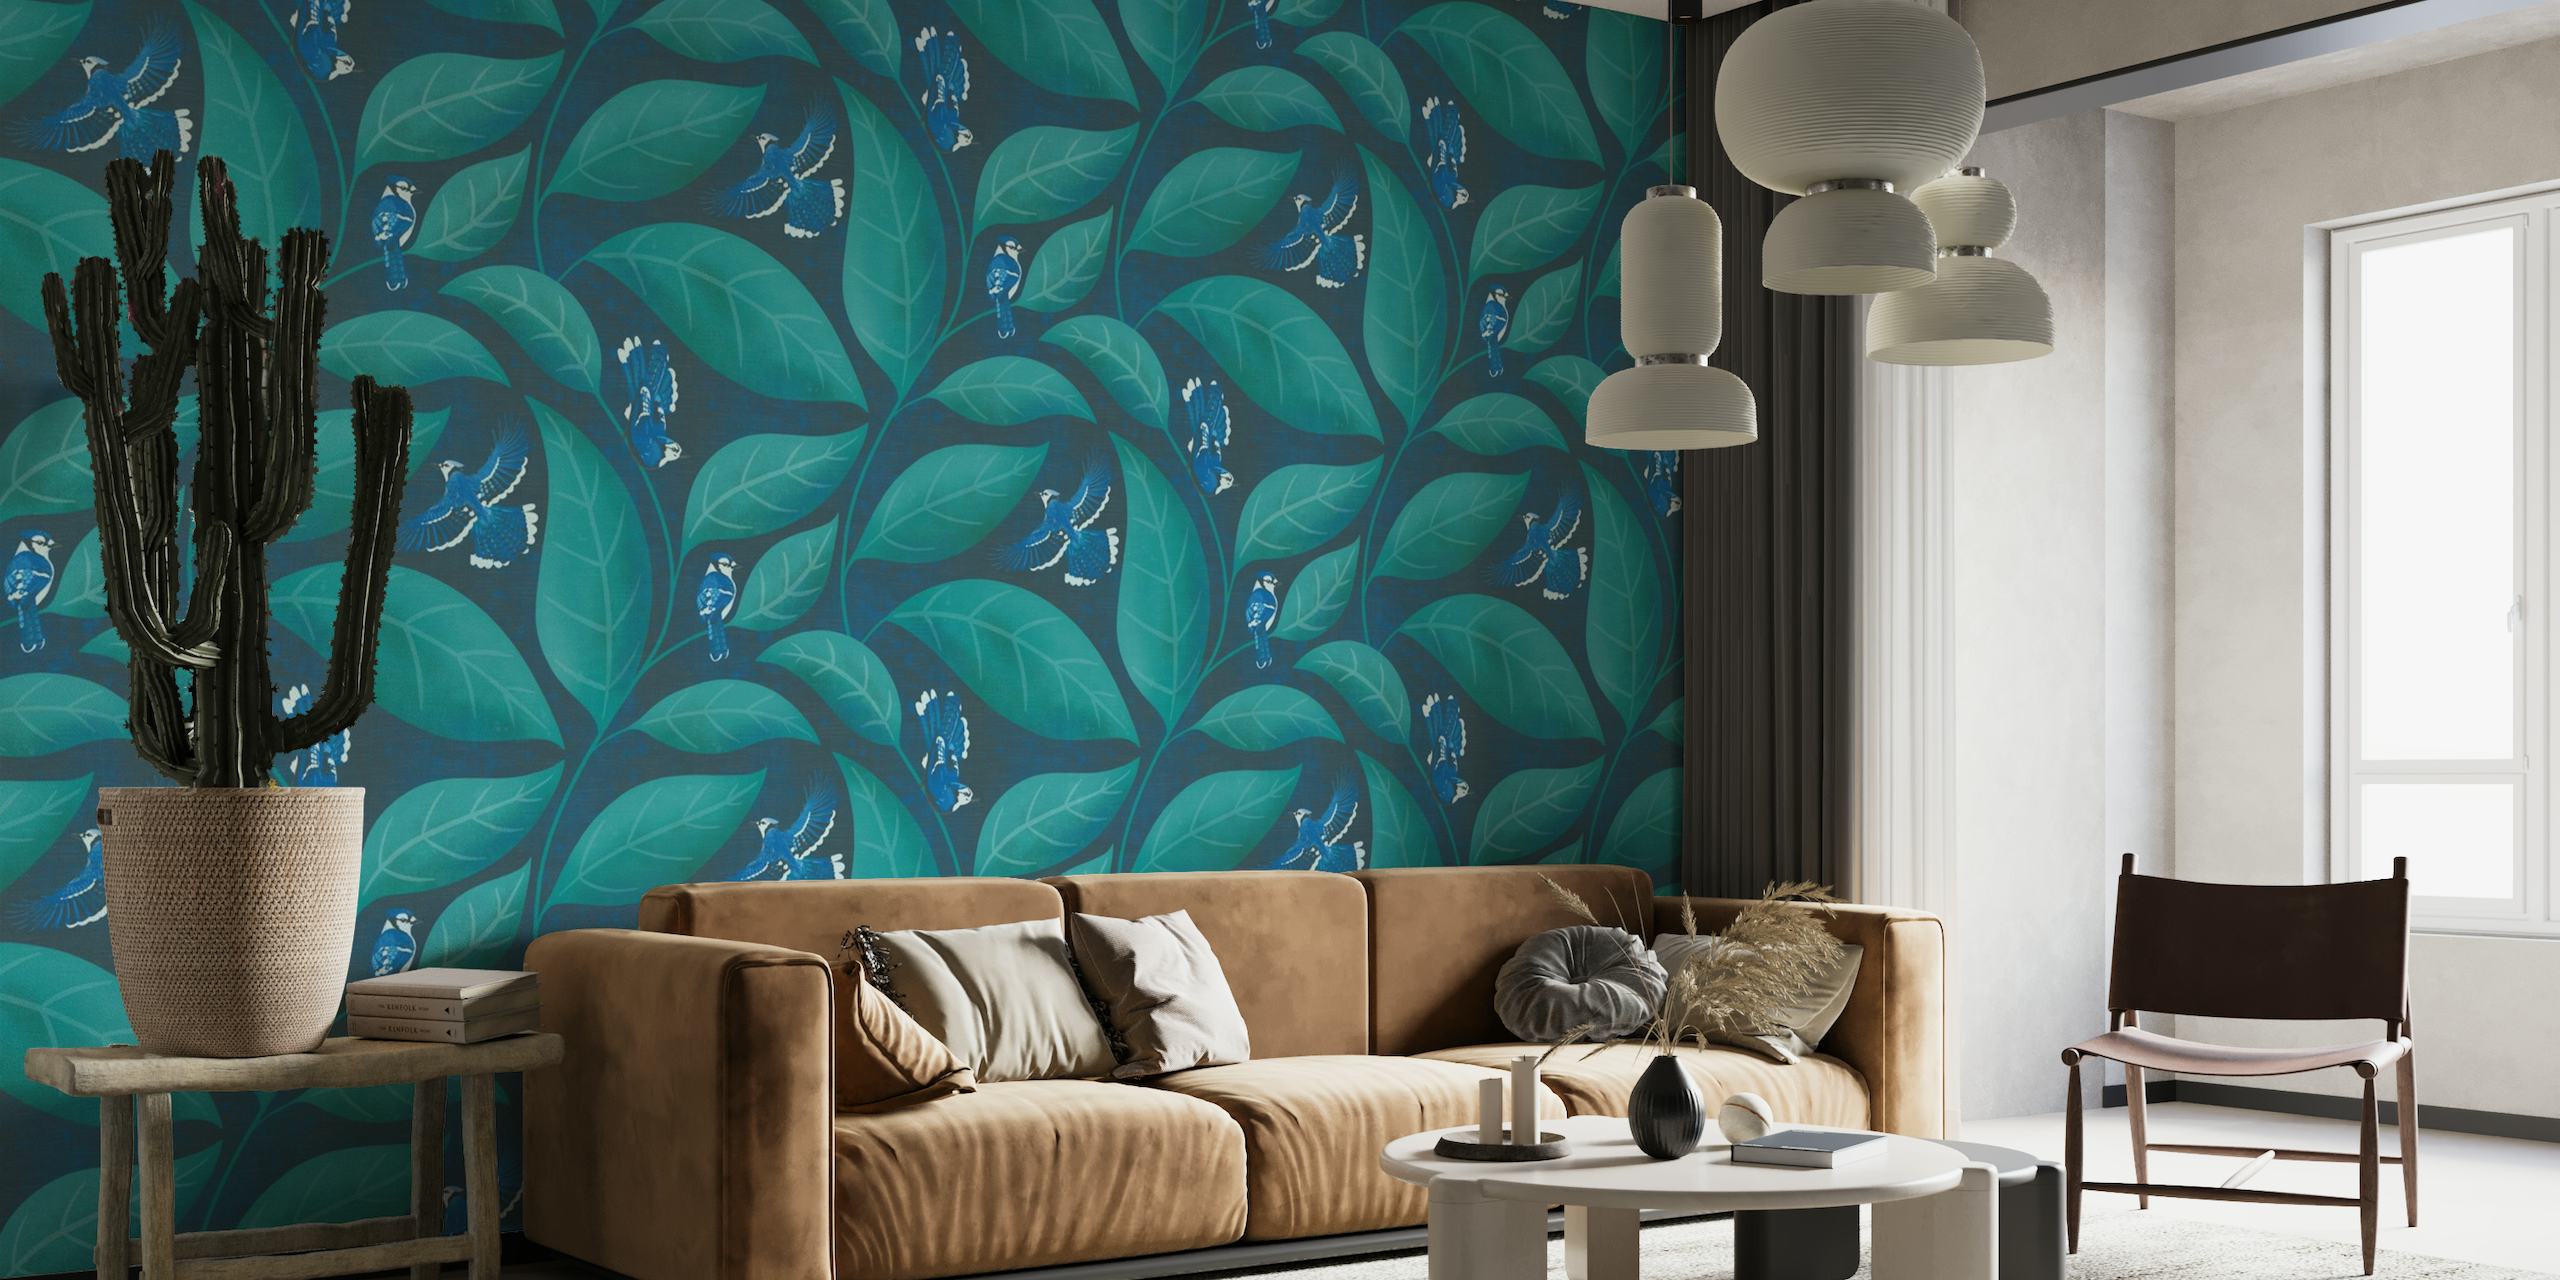 Blue Jay bird patterns on green leafy background in Pantone Ultra Steady colors wall mural.